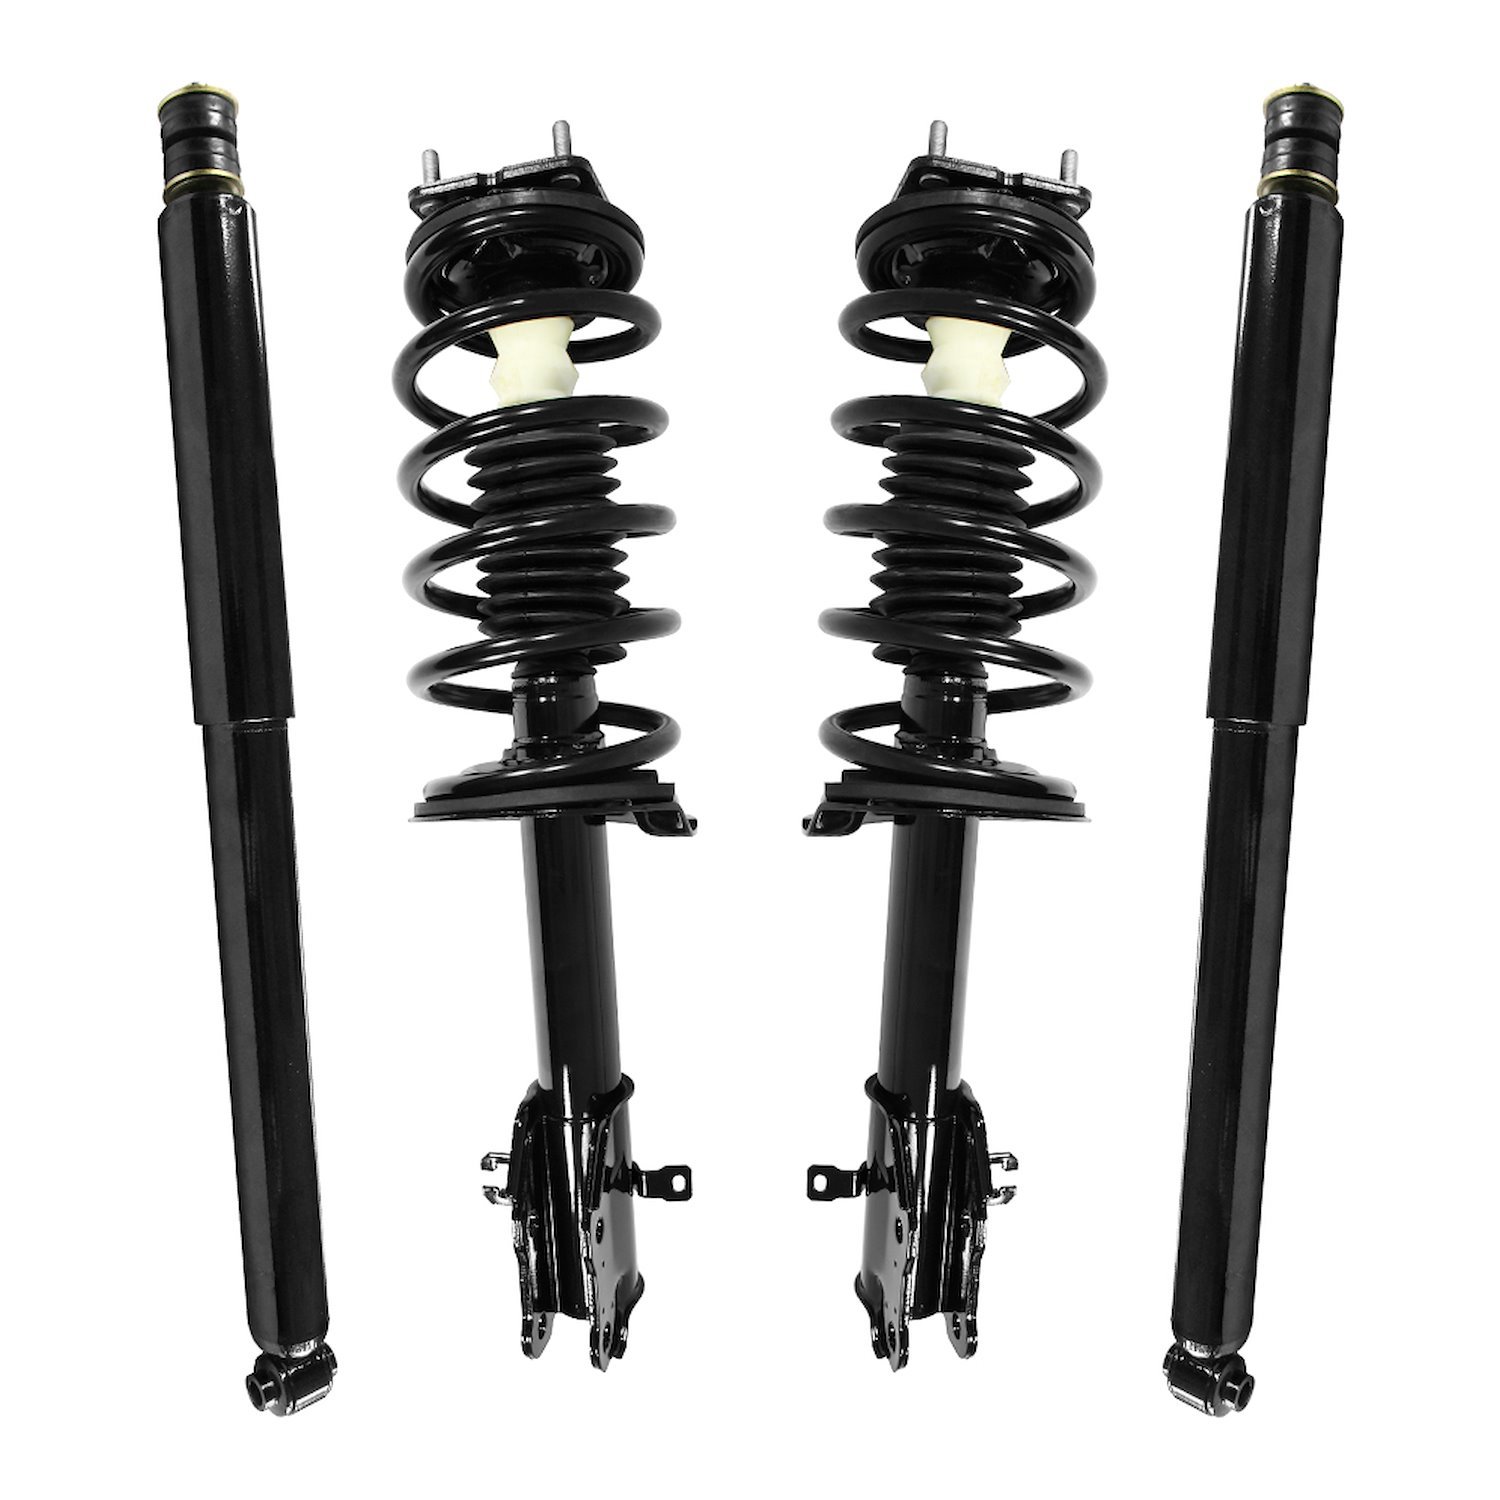 4-11705-259720-001 Front & Rear Suspension Strut & Coil Spring Assembly Fits Select Mazda CX-9